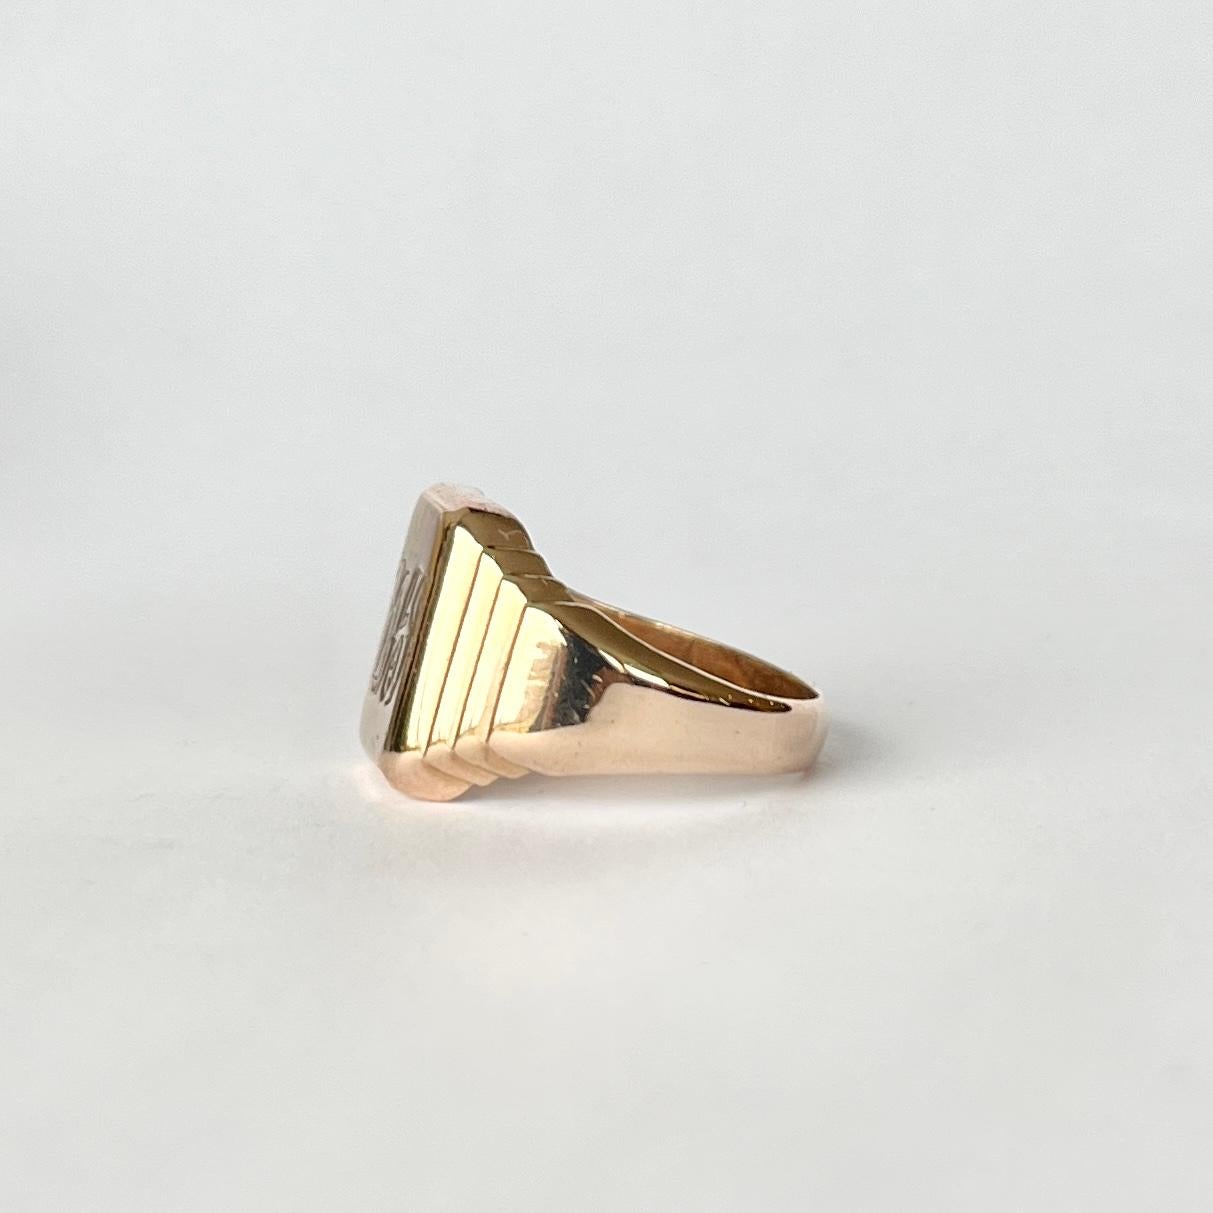 Art Deco 9 Carat Gold Signet Ring In Good Condition For Sale In Chipping Campden, GB